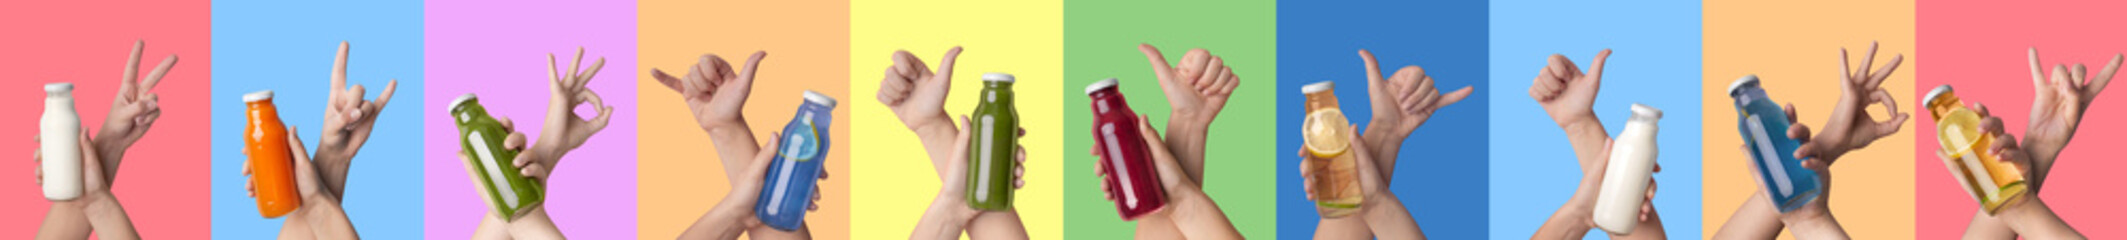 Fototapeta Hands with fresh detox juices and cocktails on colorful backgrounds obraz